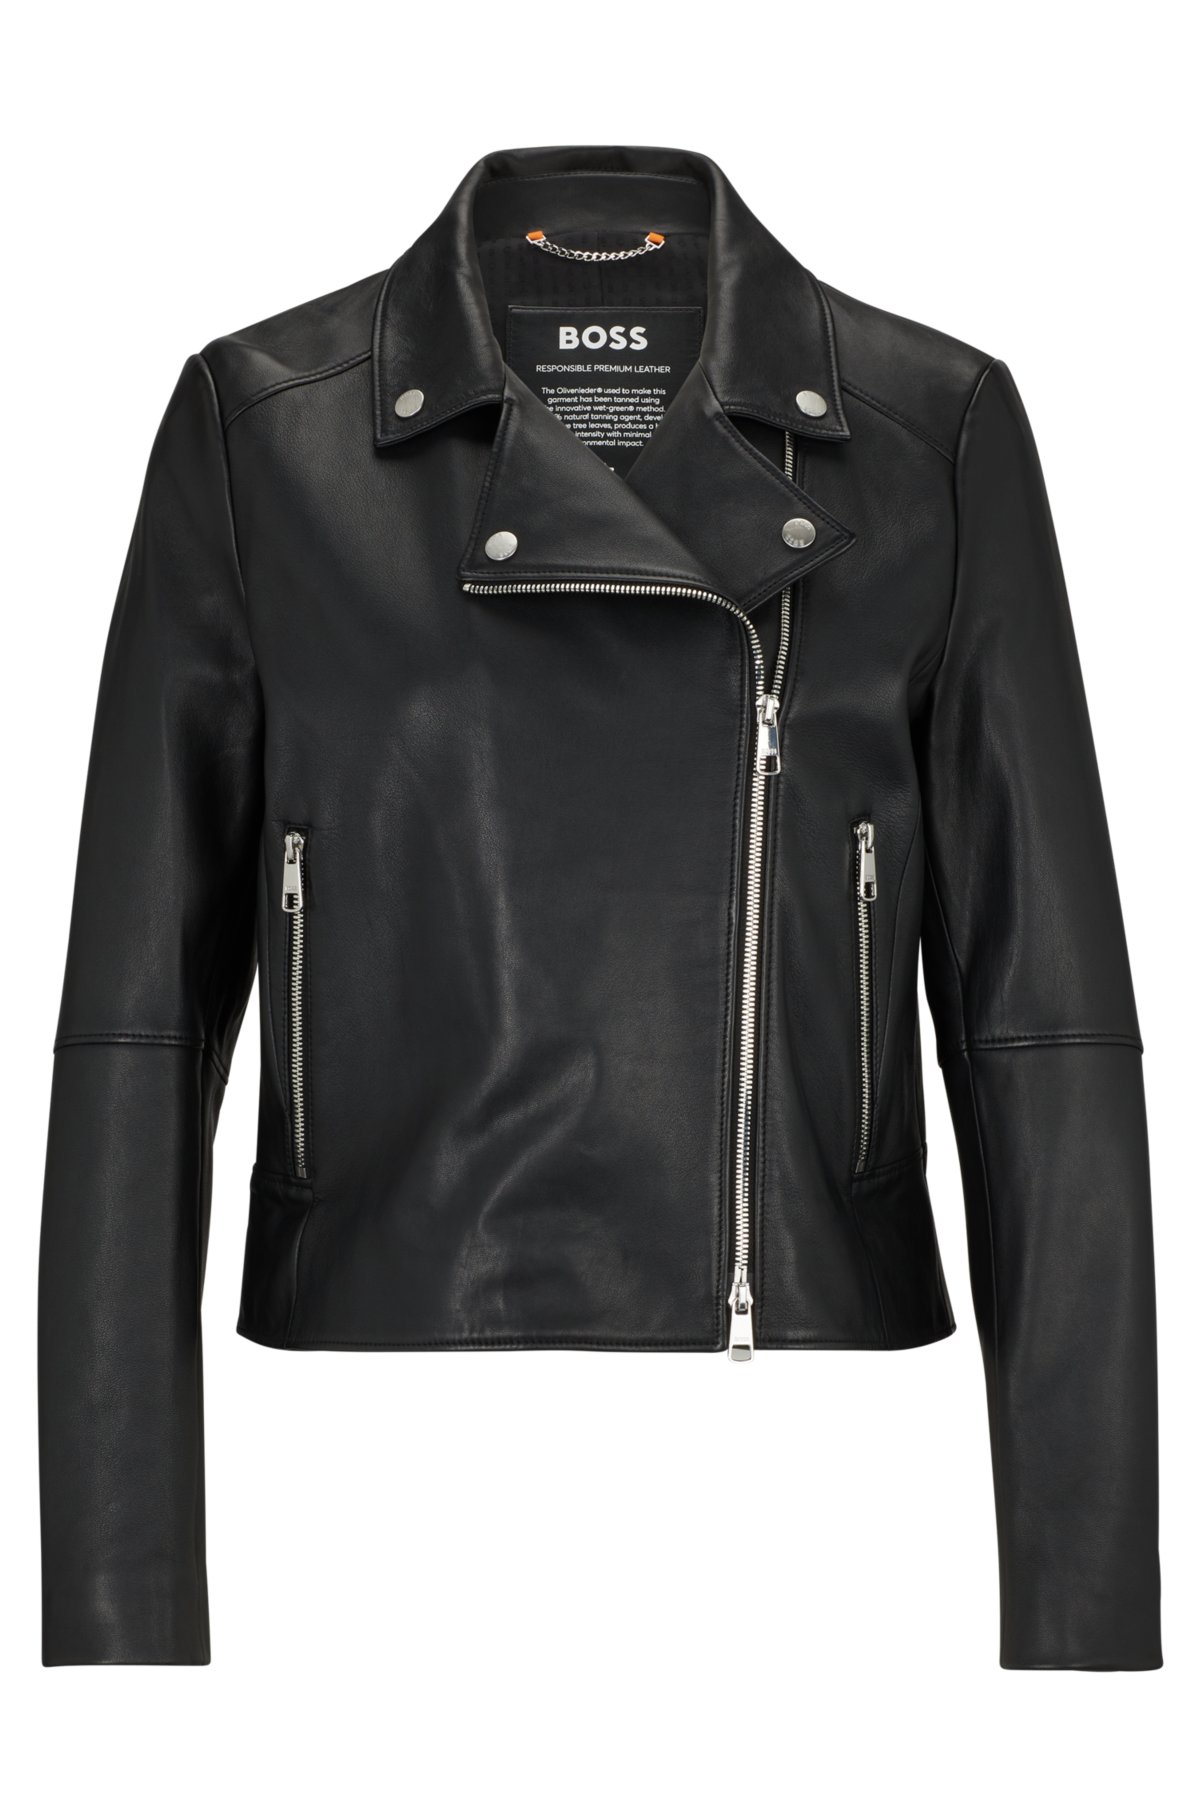 BOSS - Slim-fit jacket in naturally tanned leather